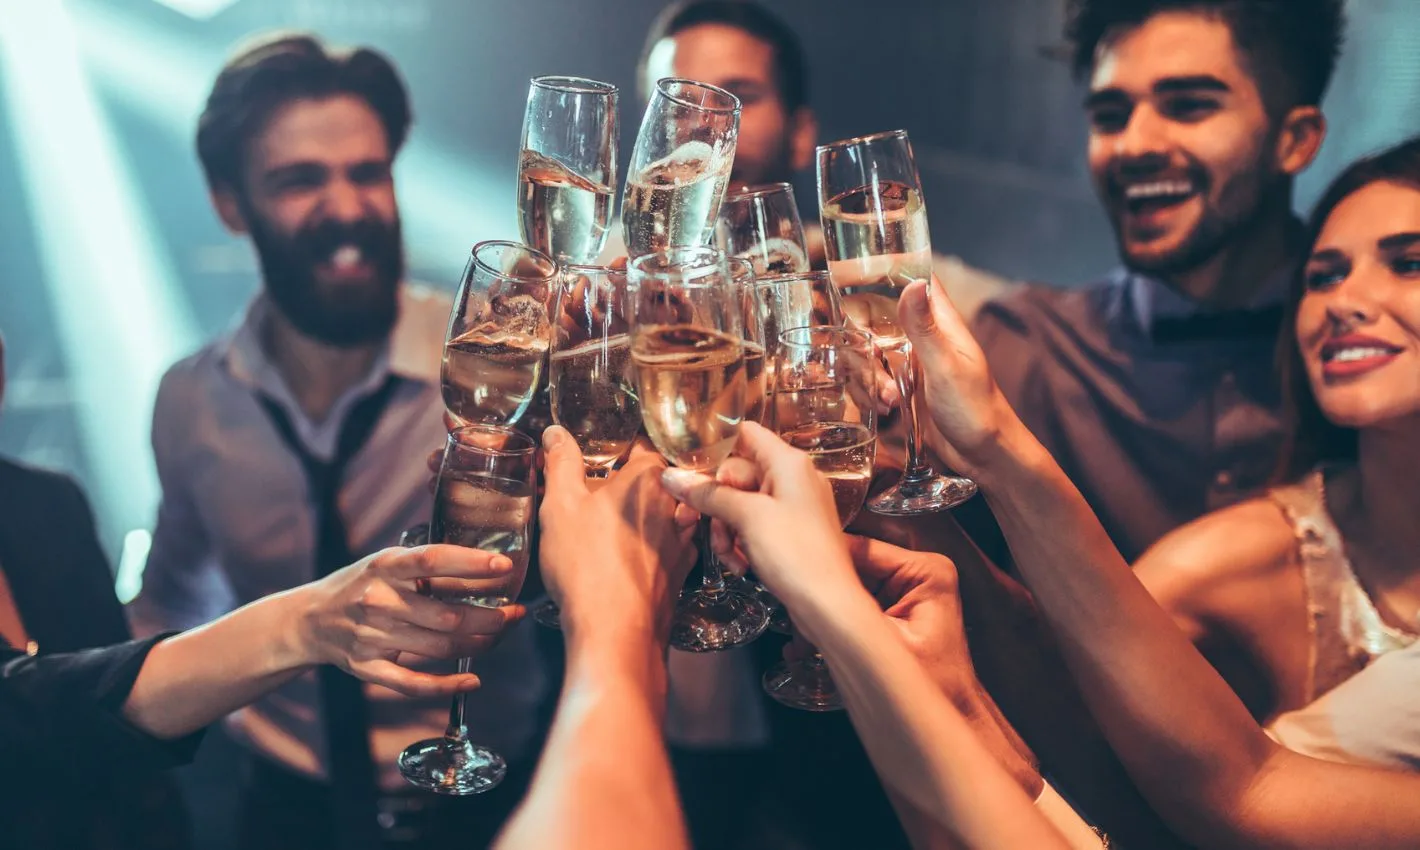 Group of friends toasting with champagne